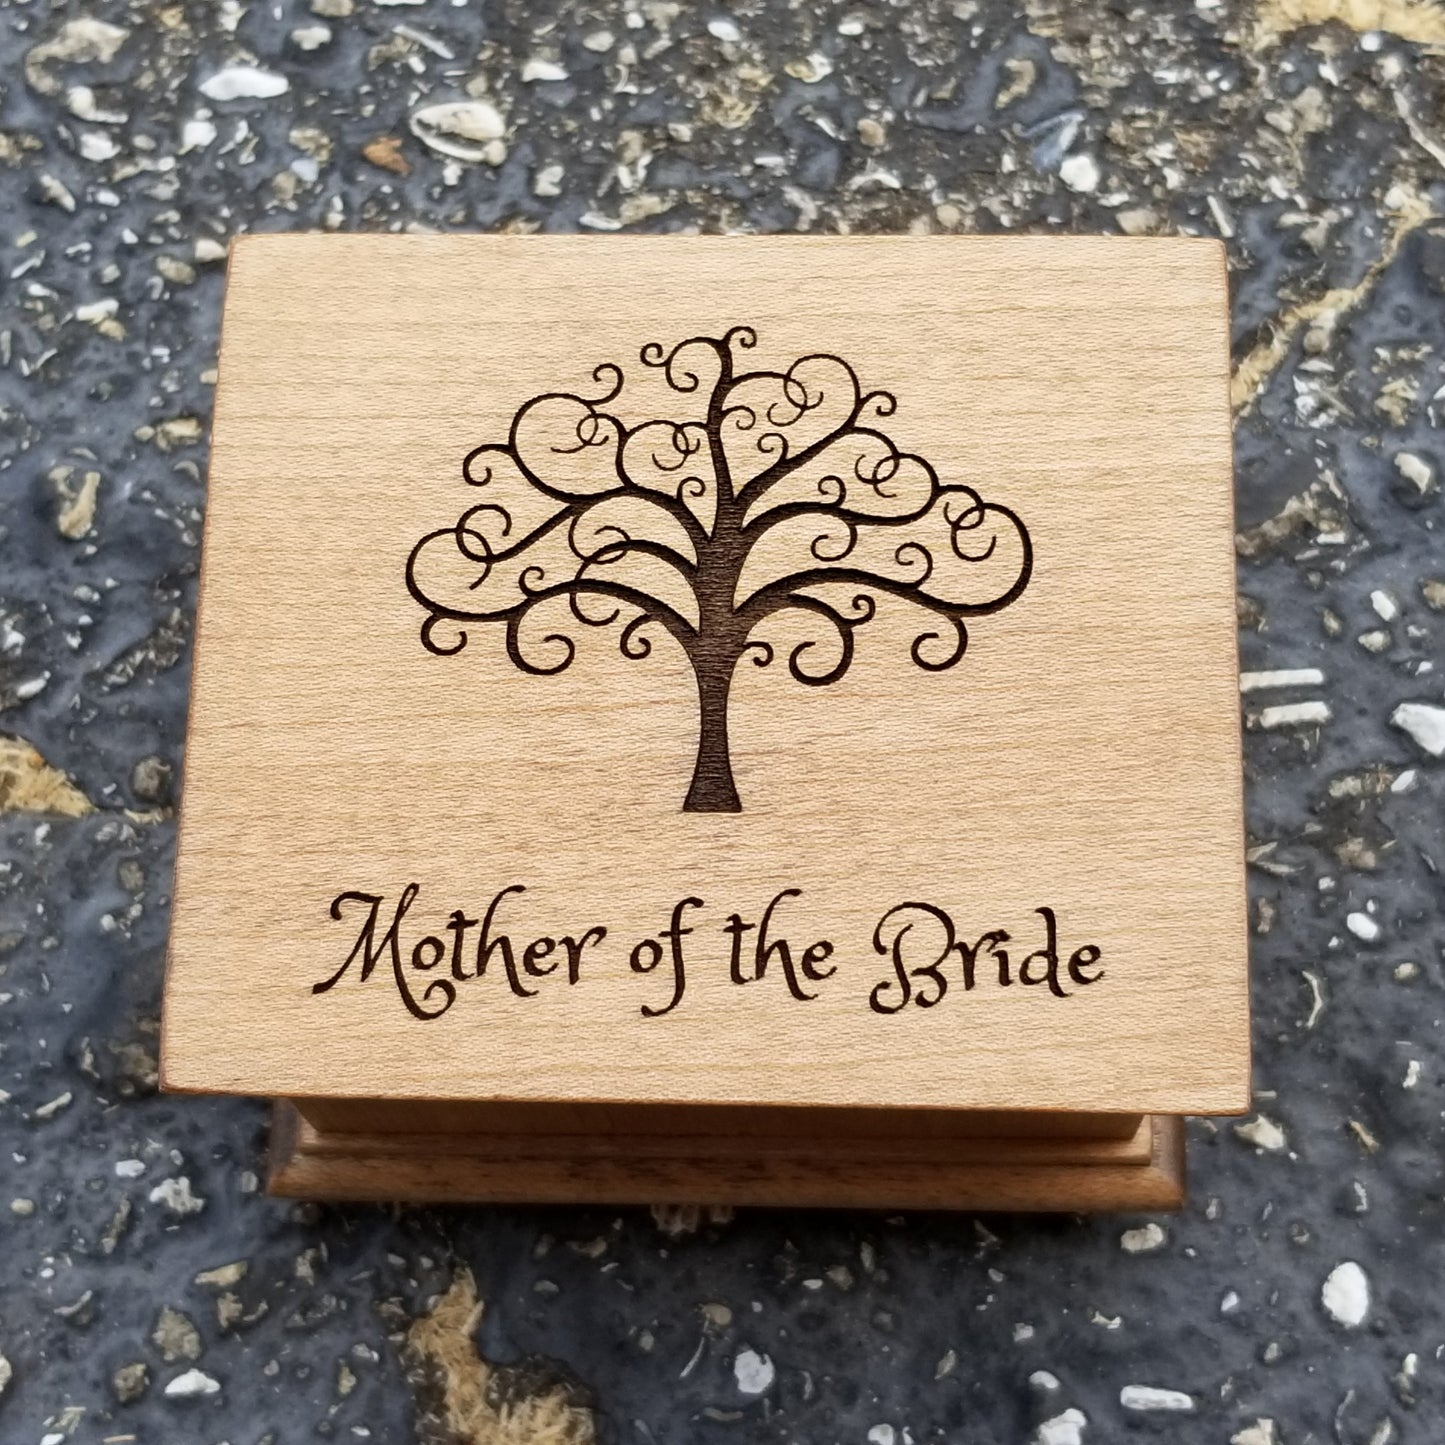 Mother of the Bride gift box, with Tree of life engraved on top, choose color and song